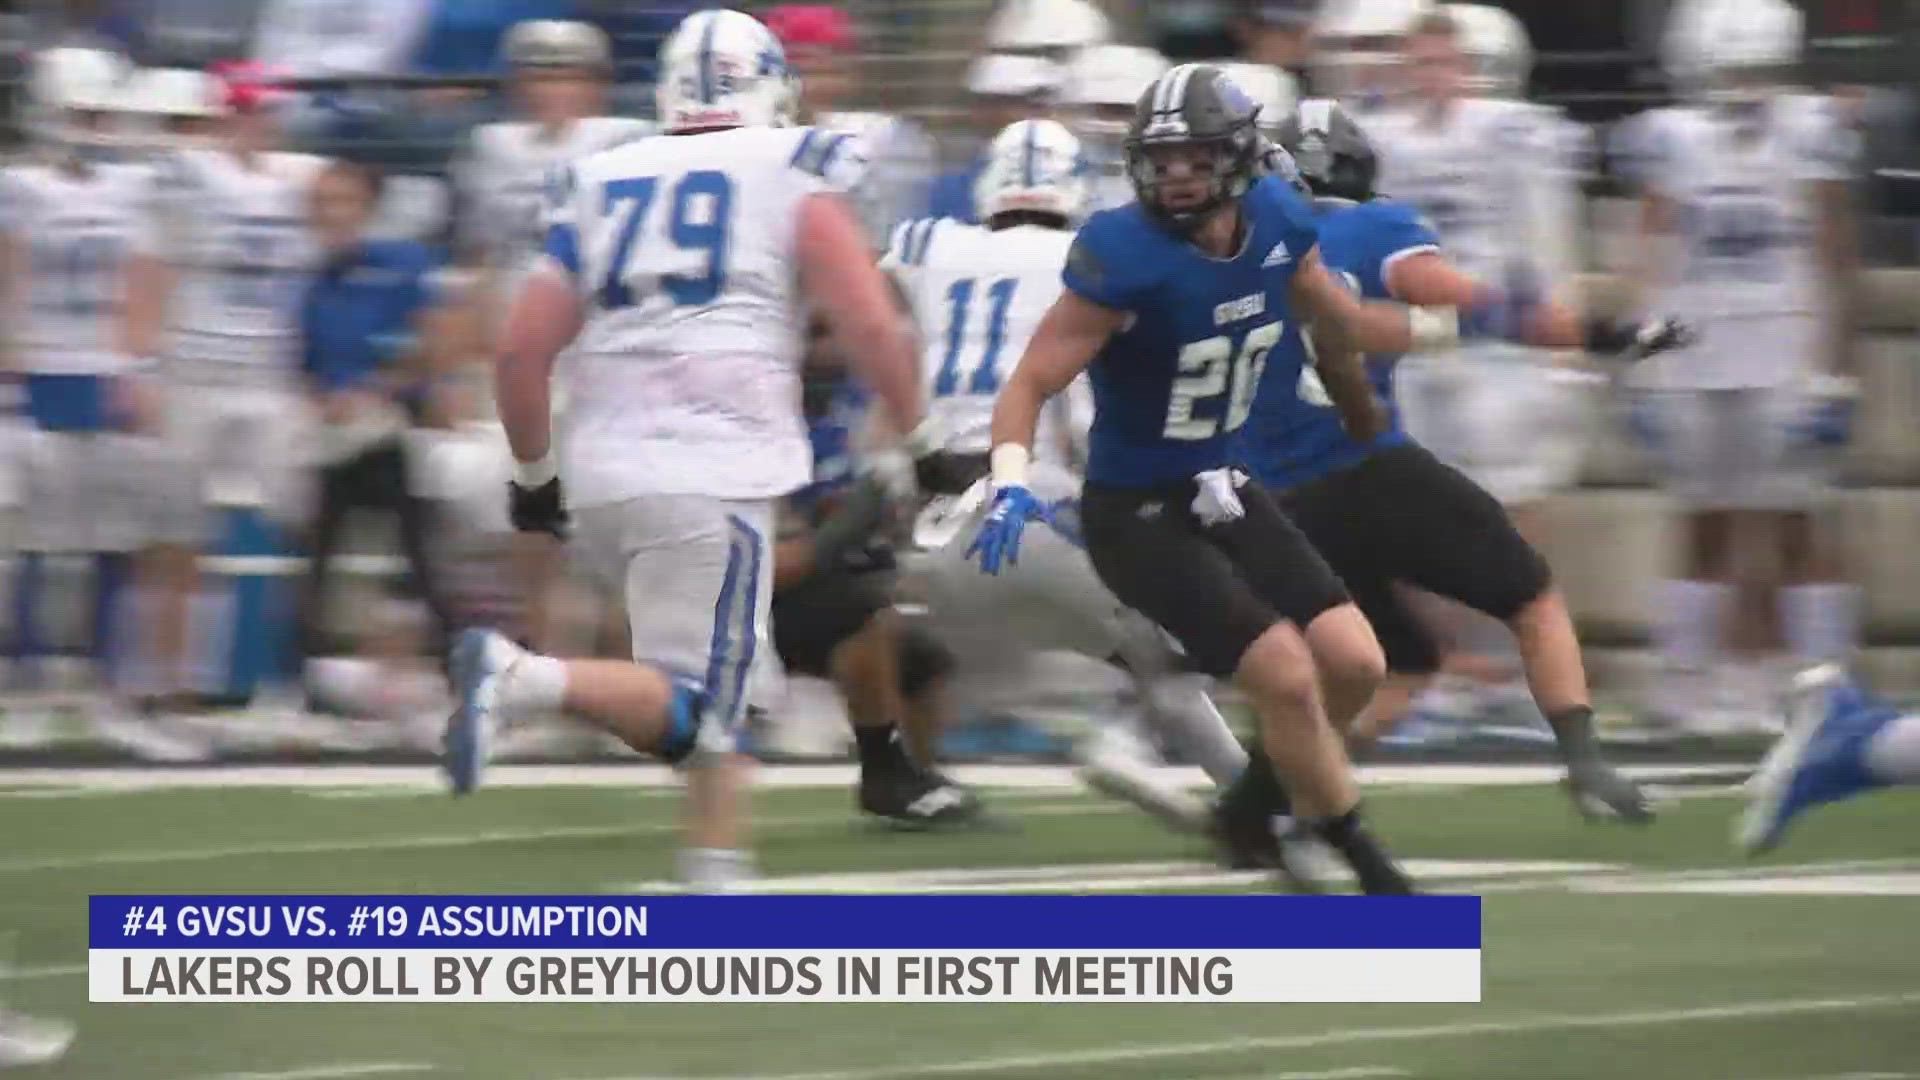 The GVSU offense produced 496 yards of total offense, 251 via the rush and 245 through the air.